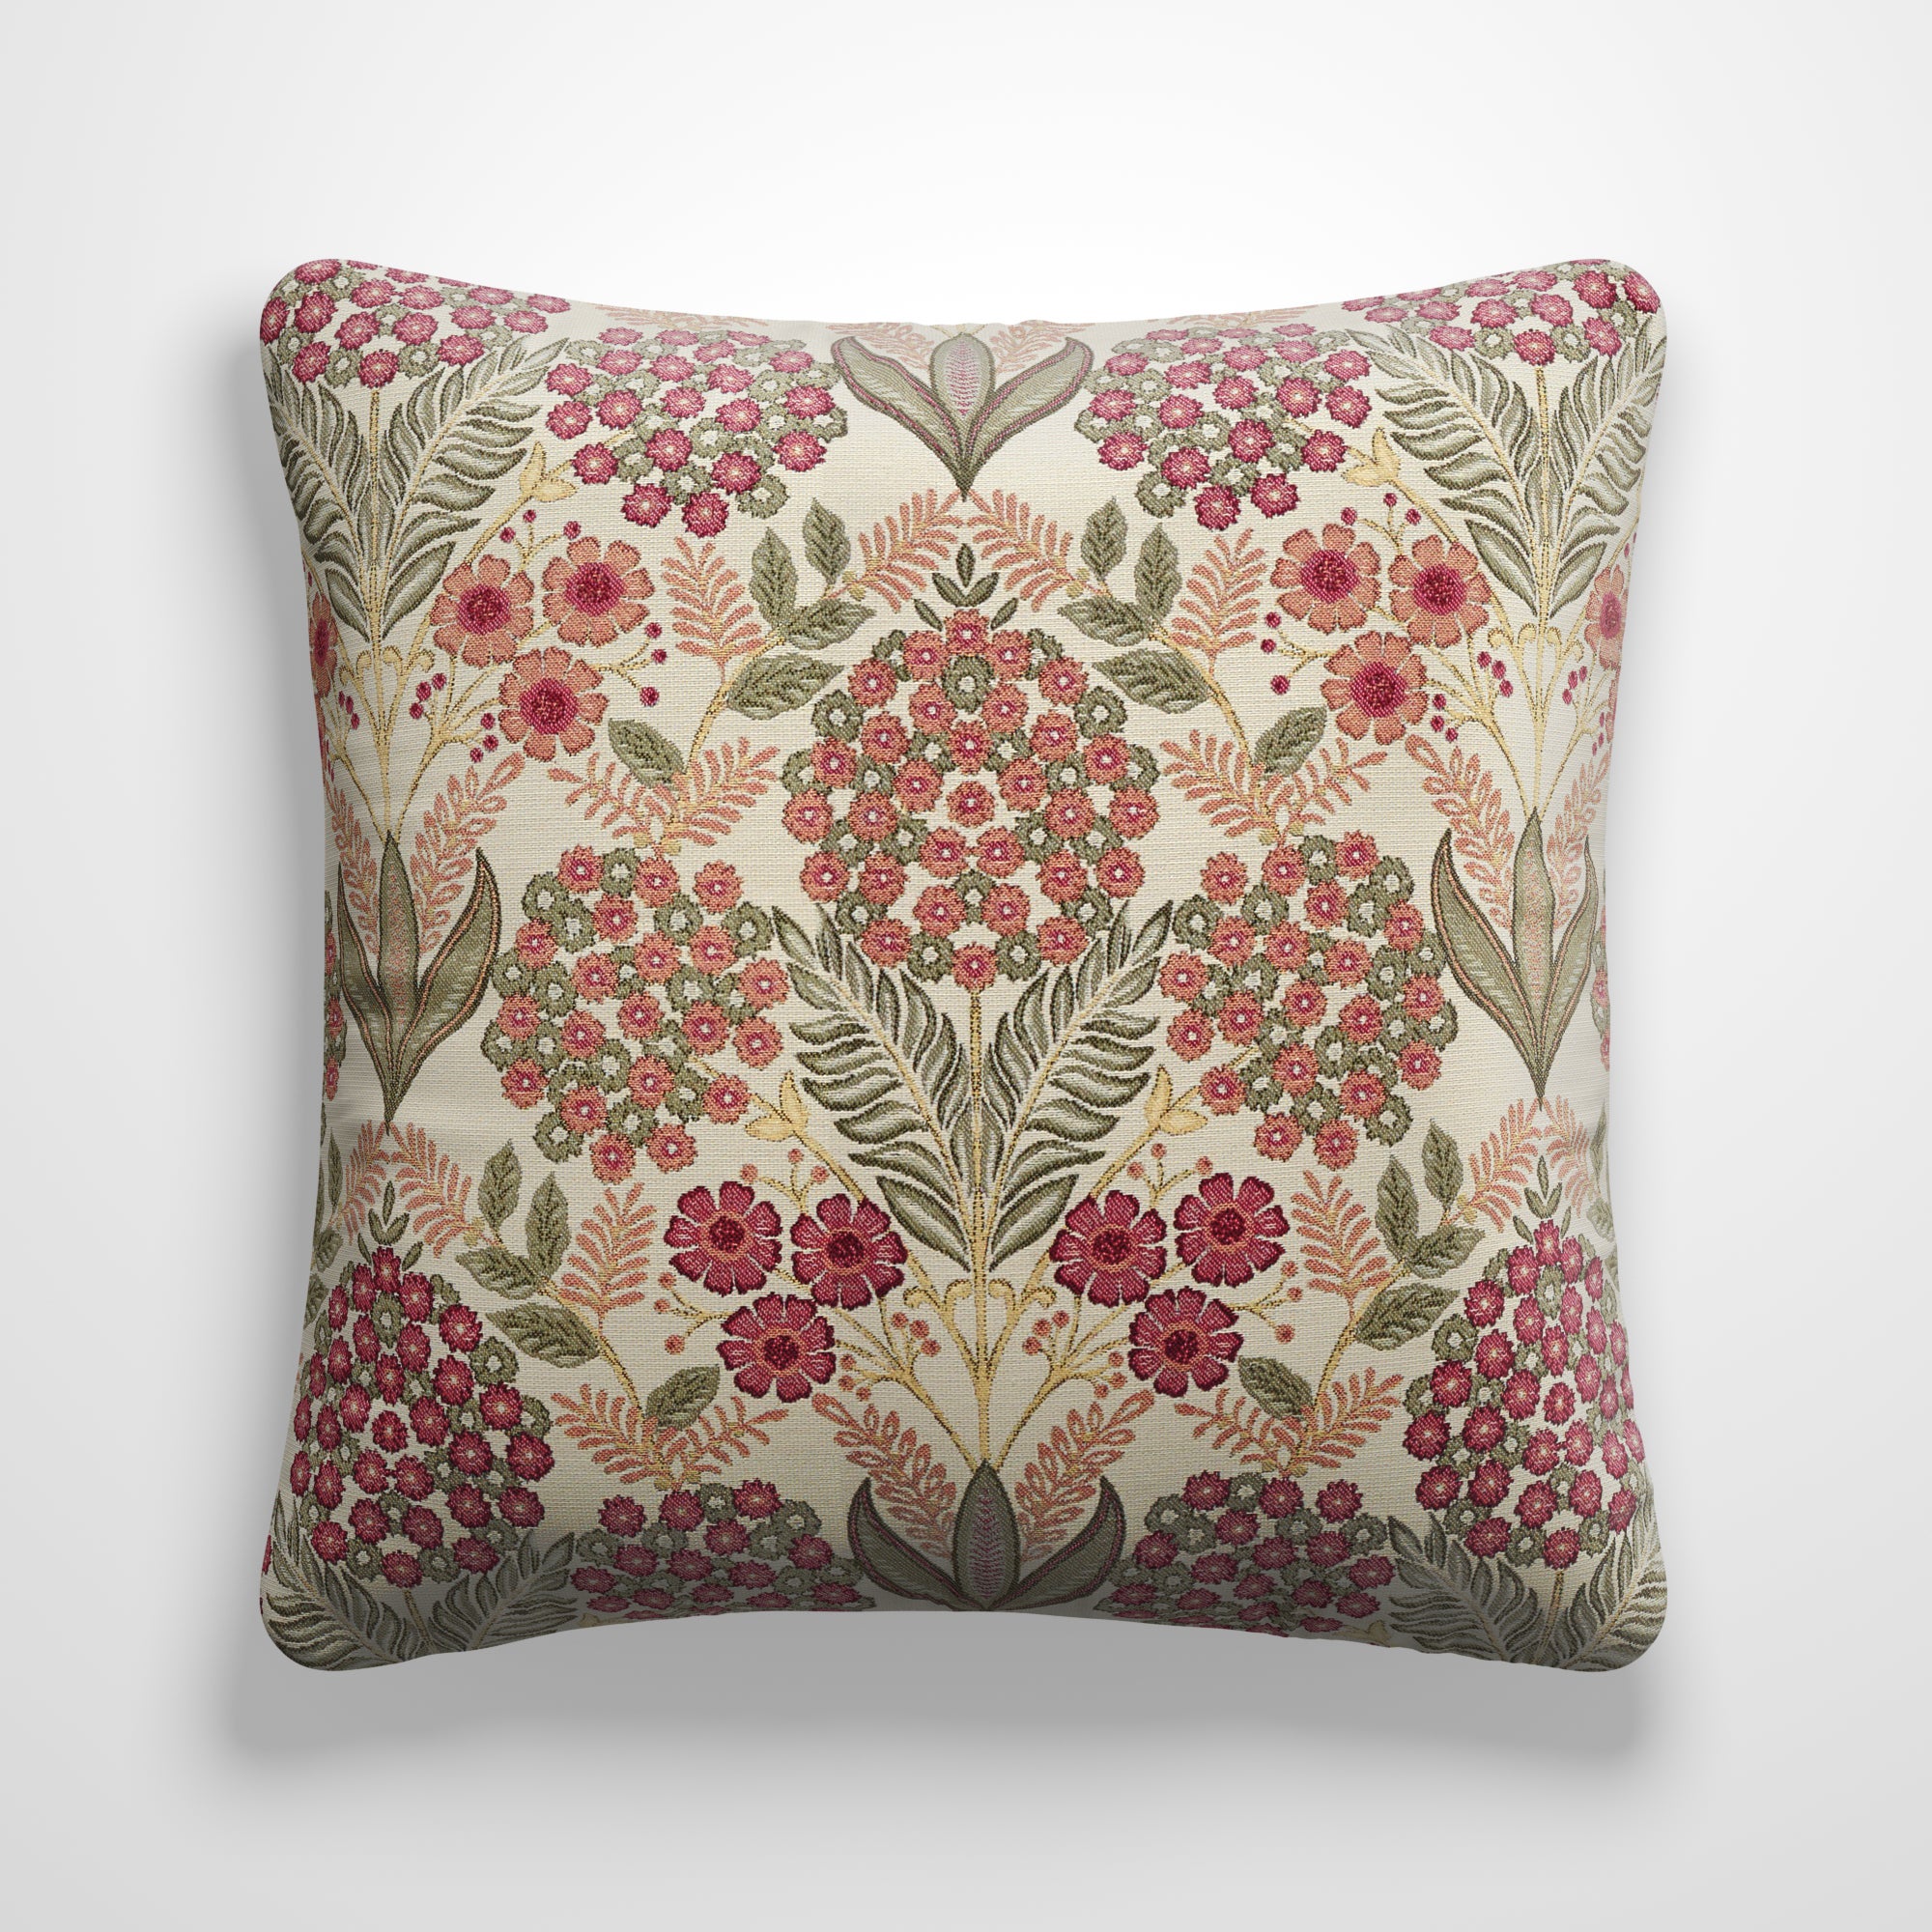 Wilmington Made to Order Cushion Cover Wilmington Raspberry